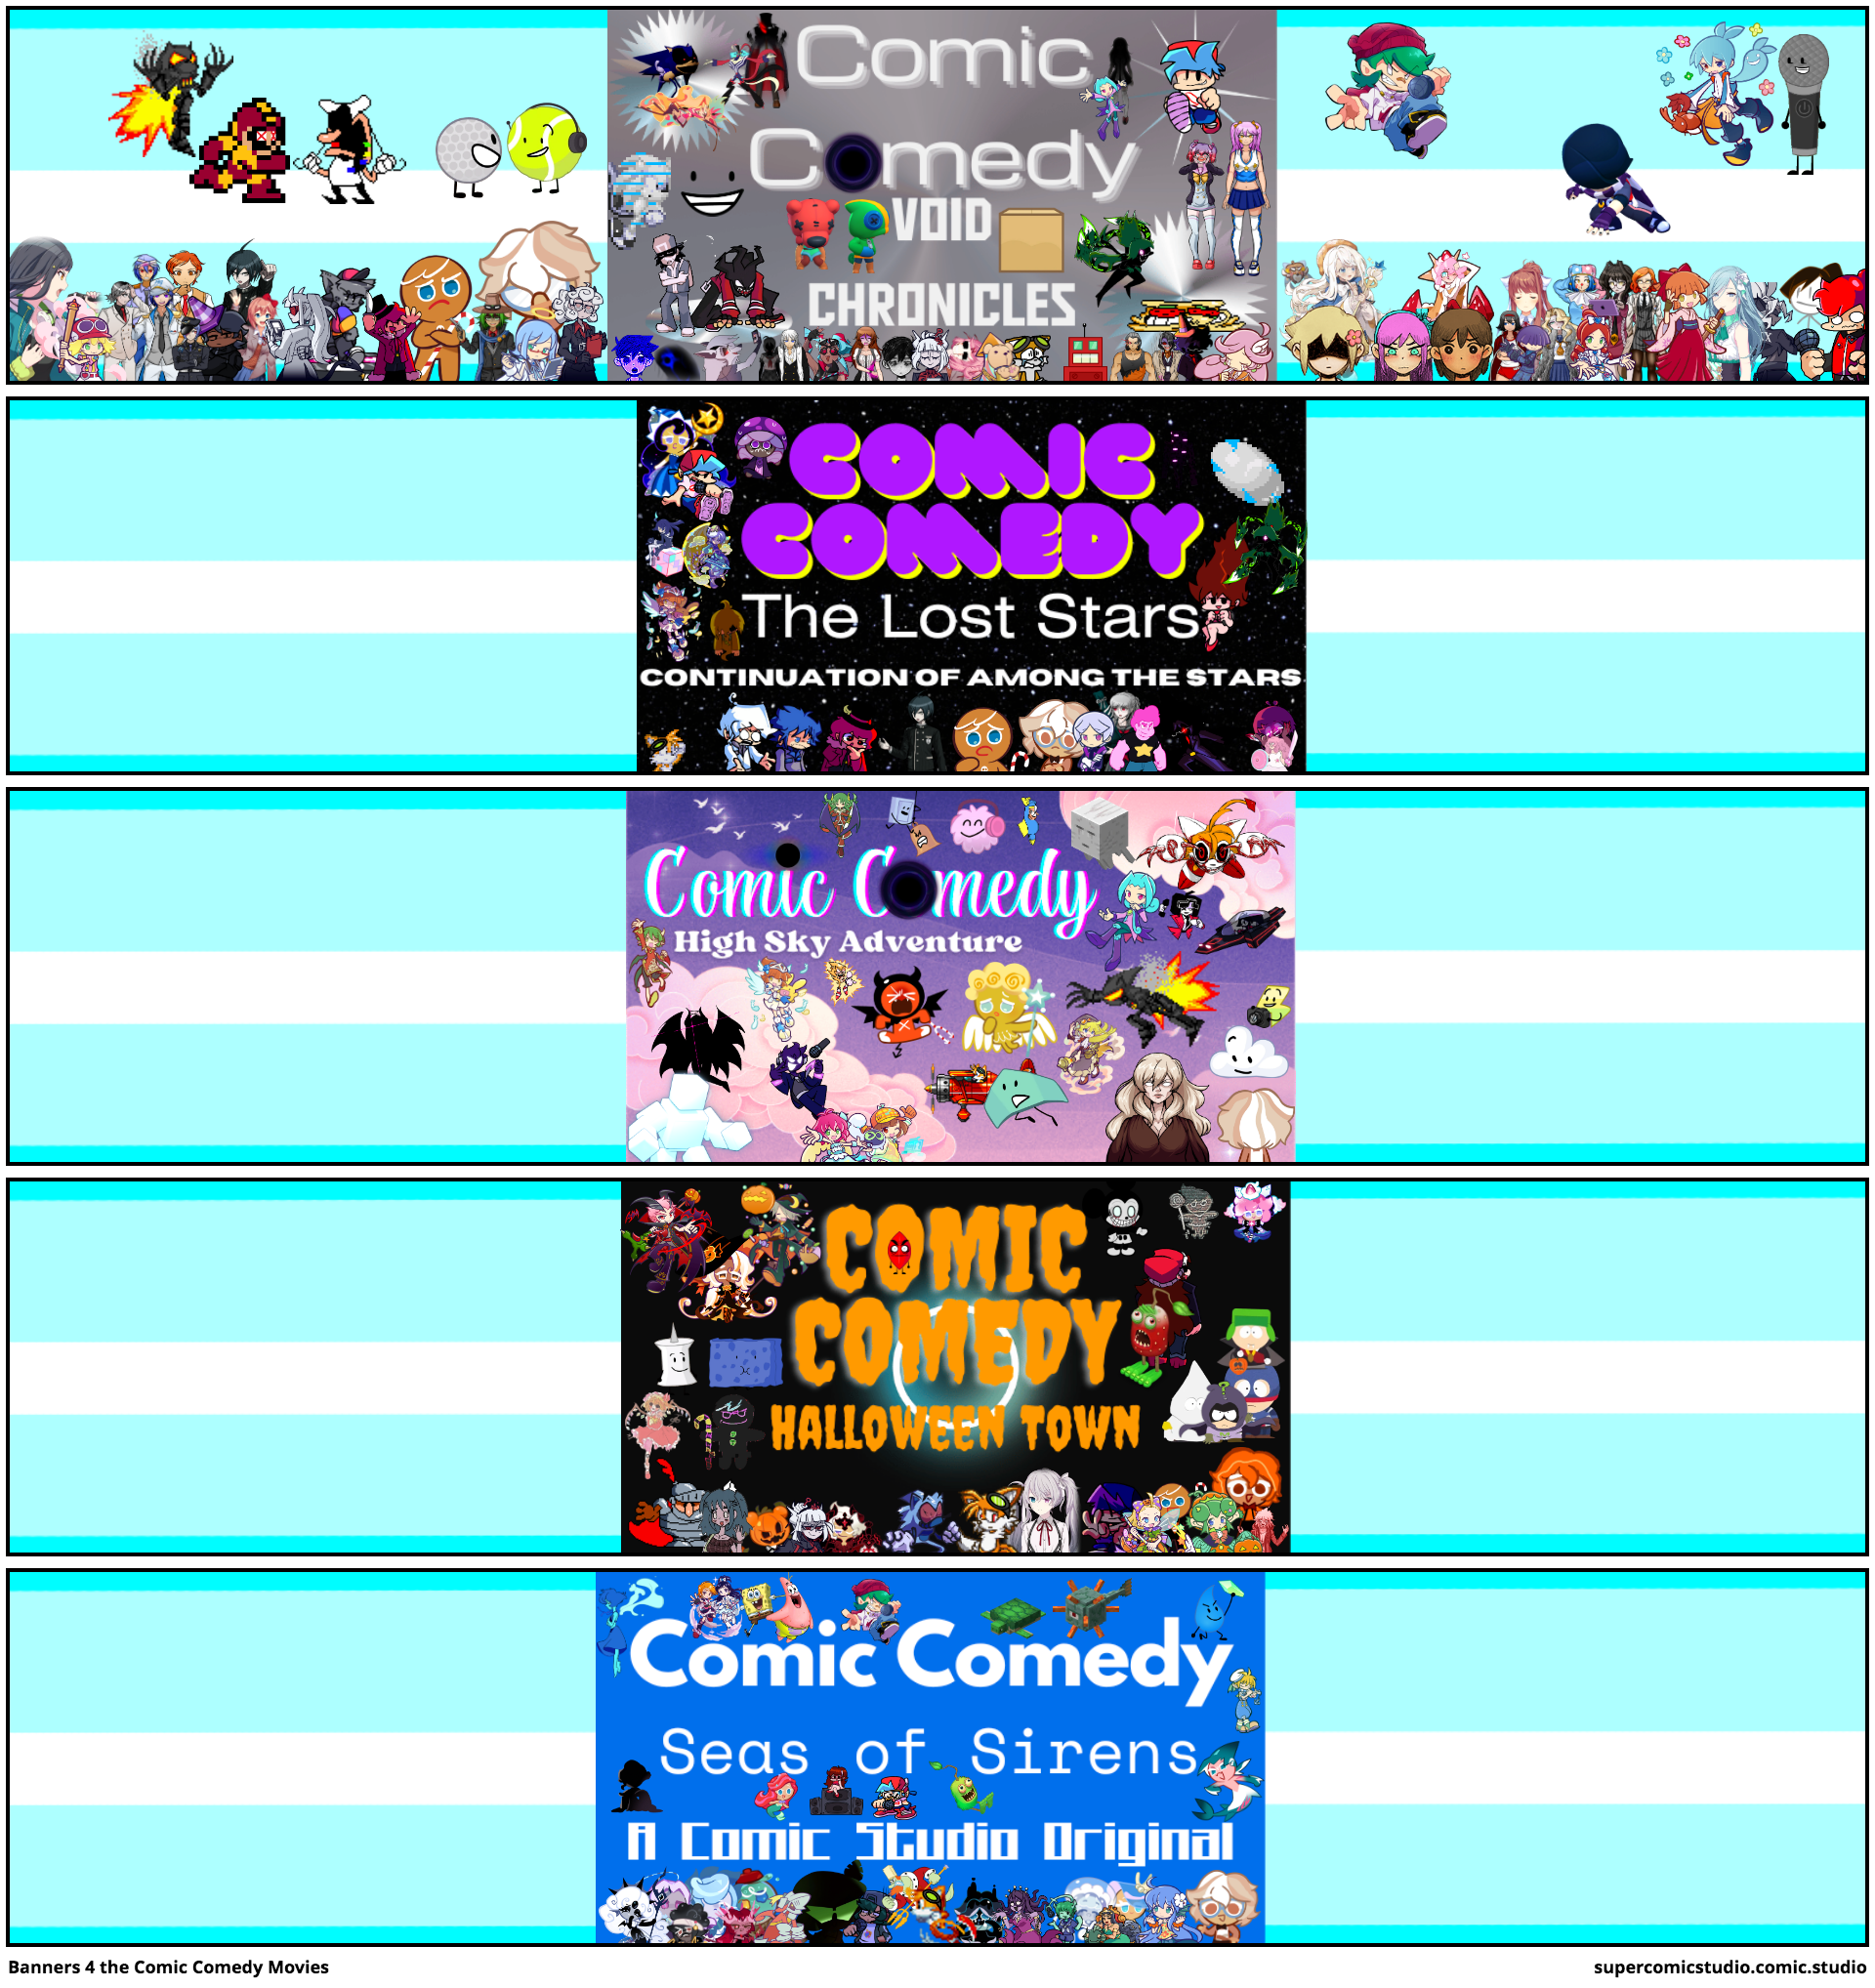 Banners 4 the Comic Comedy Movies